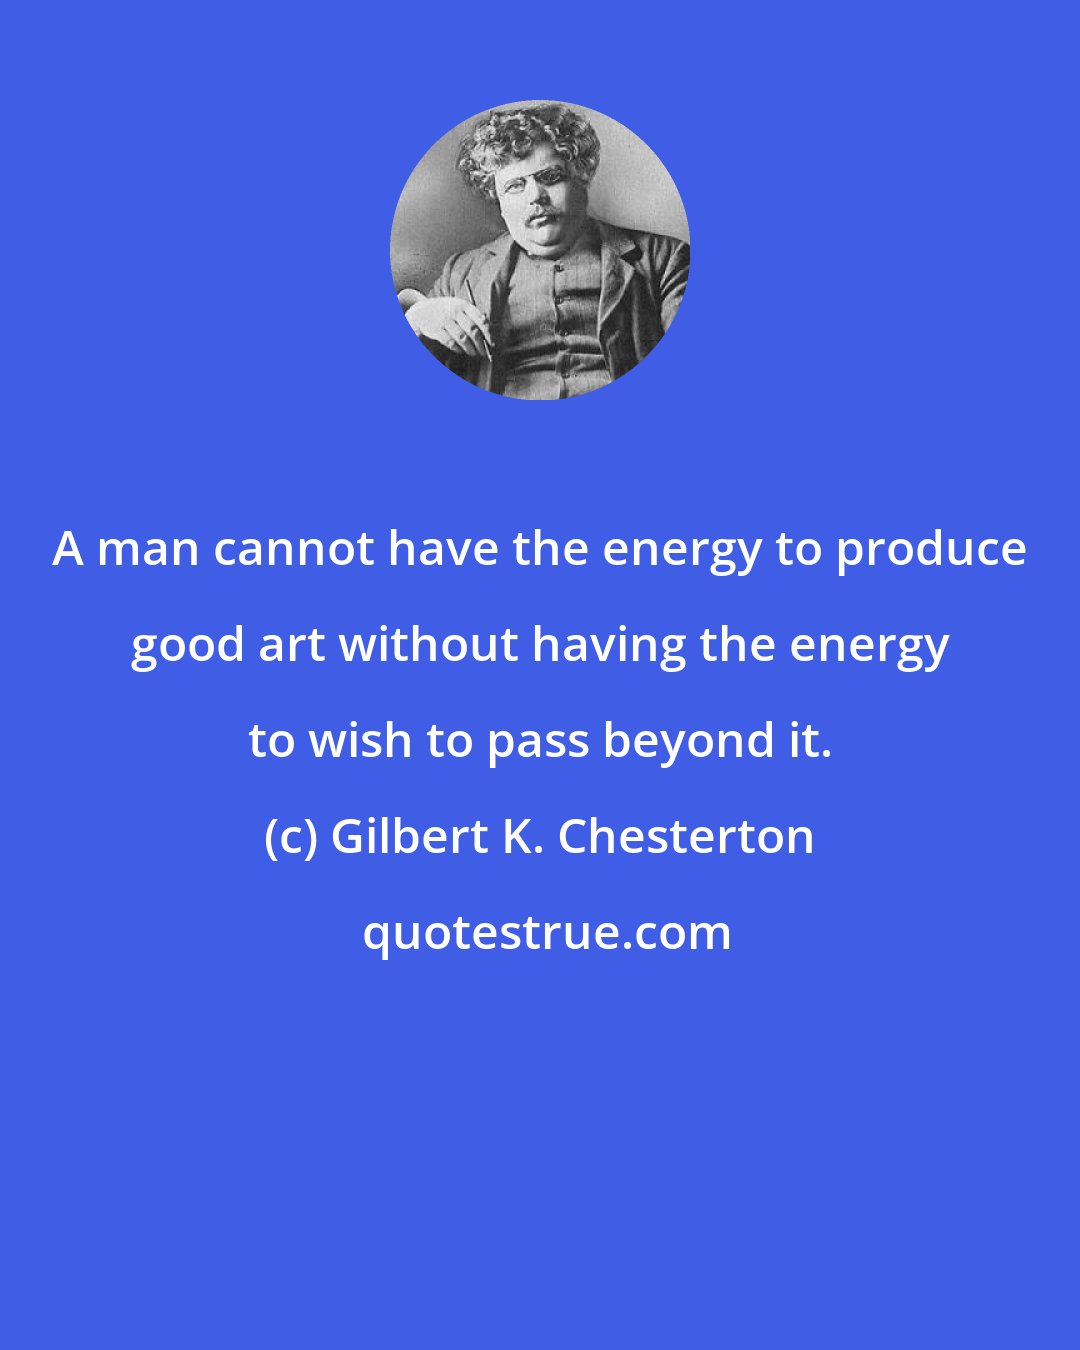 Gilbert K. Chesterton: A man cannot have the energy to produce good art without having the energy to wish to pass beyond it.